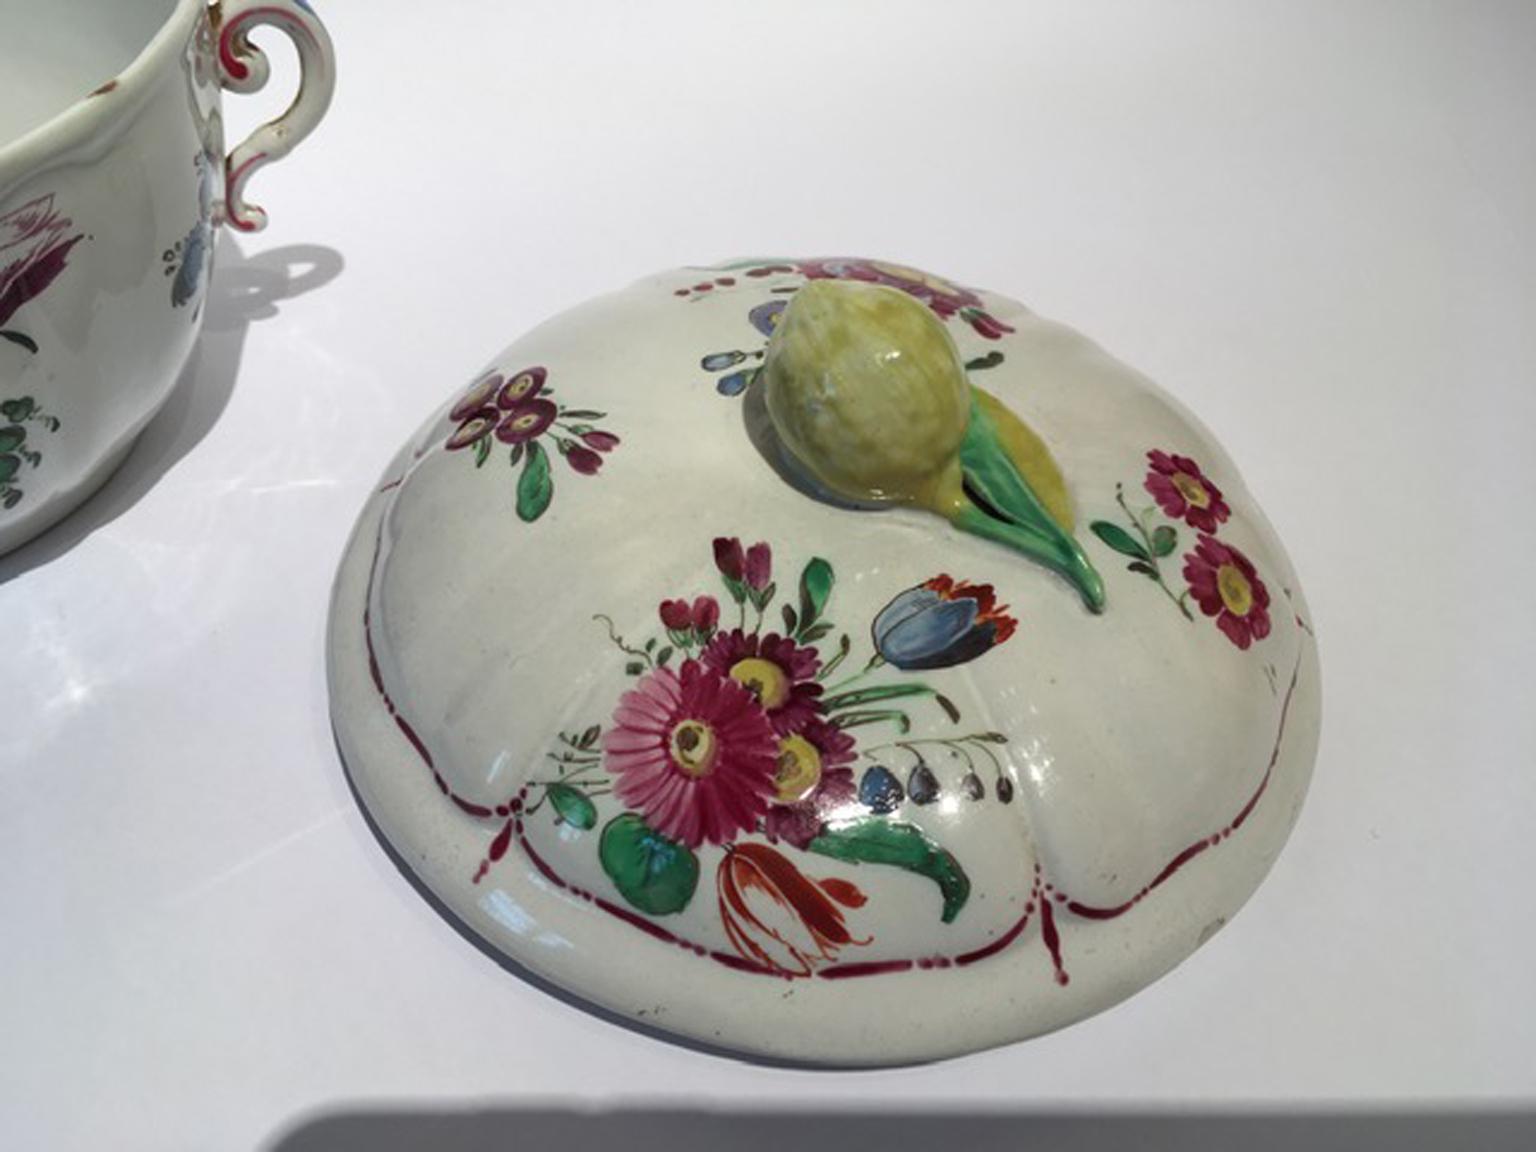 Italy 18th Century Richard Ginori Porcelain Sugar Bowl with Floral Drawings 5